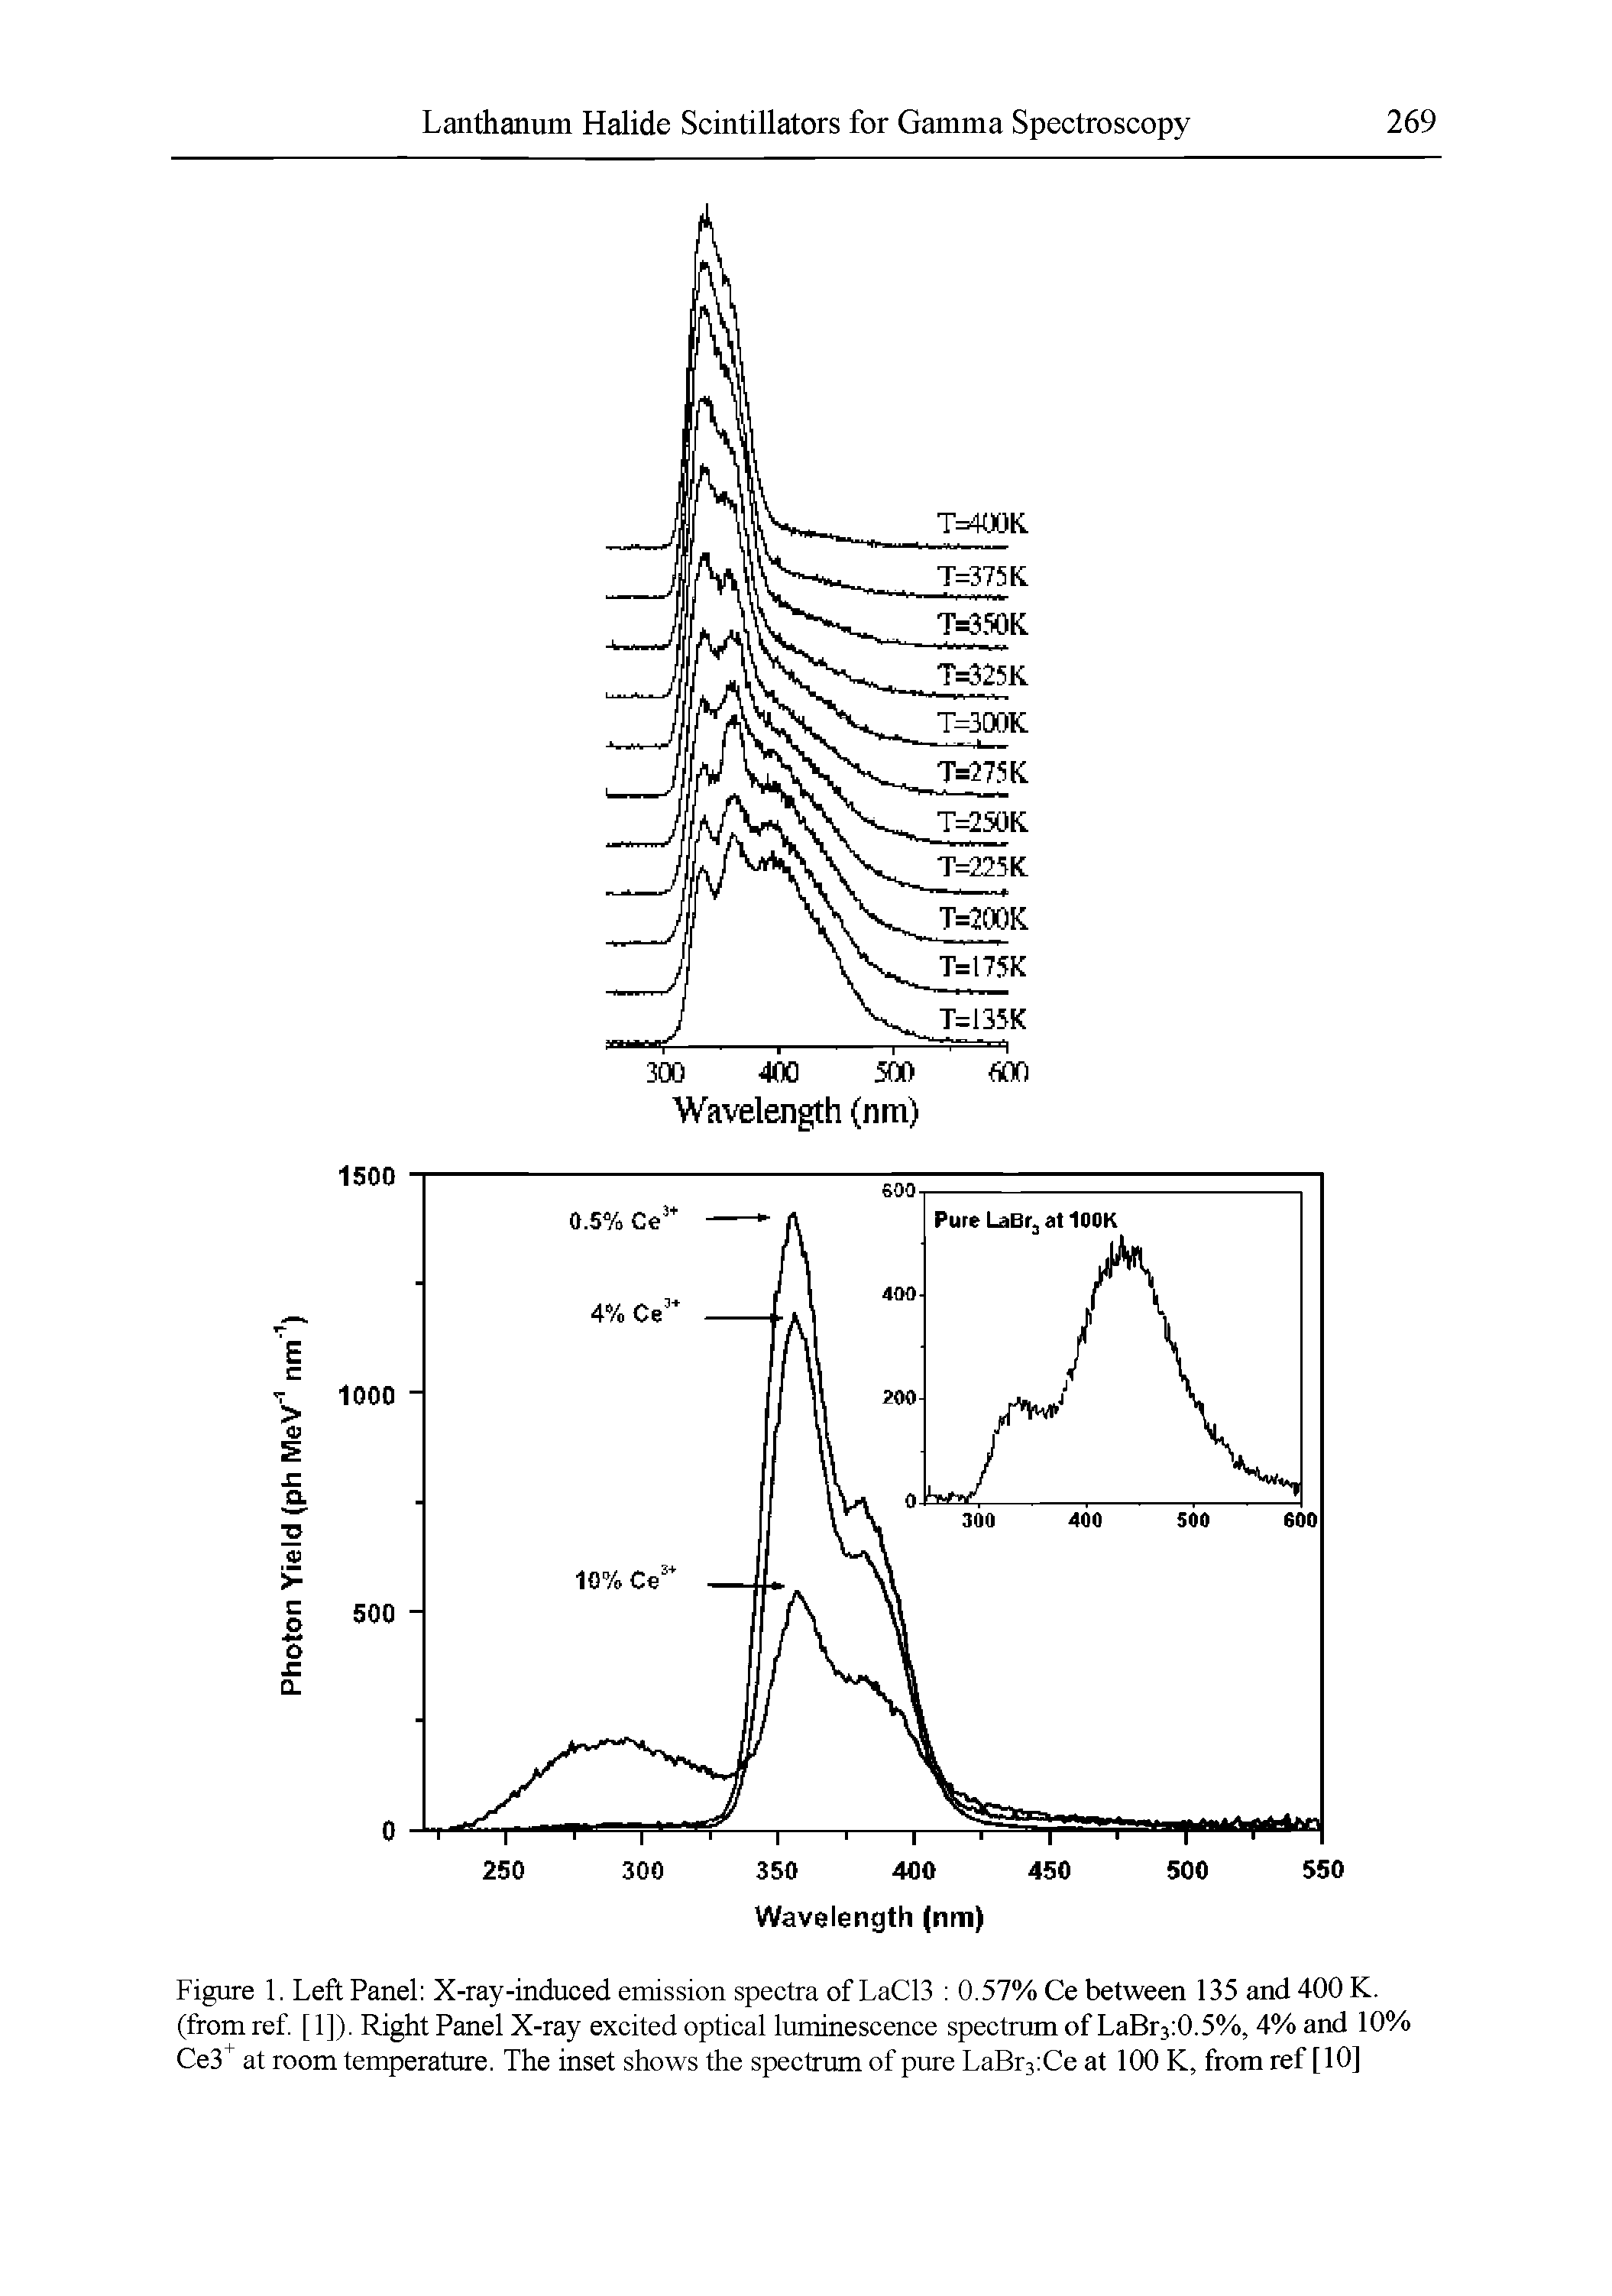 Figure 1. Left Panel X-ray-induced emission spectra of LaC13 0.57% Ce between 135 and 400 K. (from ref [1]). Right Panel X-ray excited optical luminescence spectramofLaBr3 0.5%, 4%and 10% Ce3 at room temperature. The inset shows the spectrum of pure LaBr3 Ce at 100 K, from ref [10]...